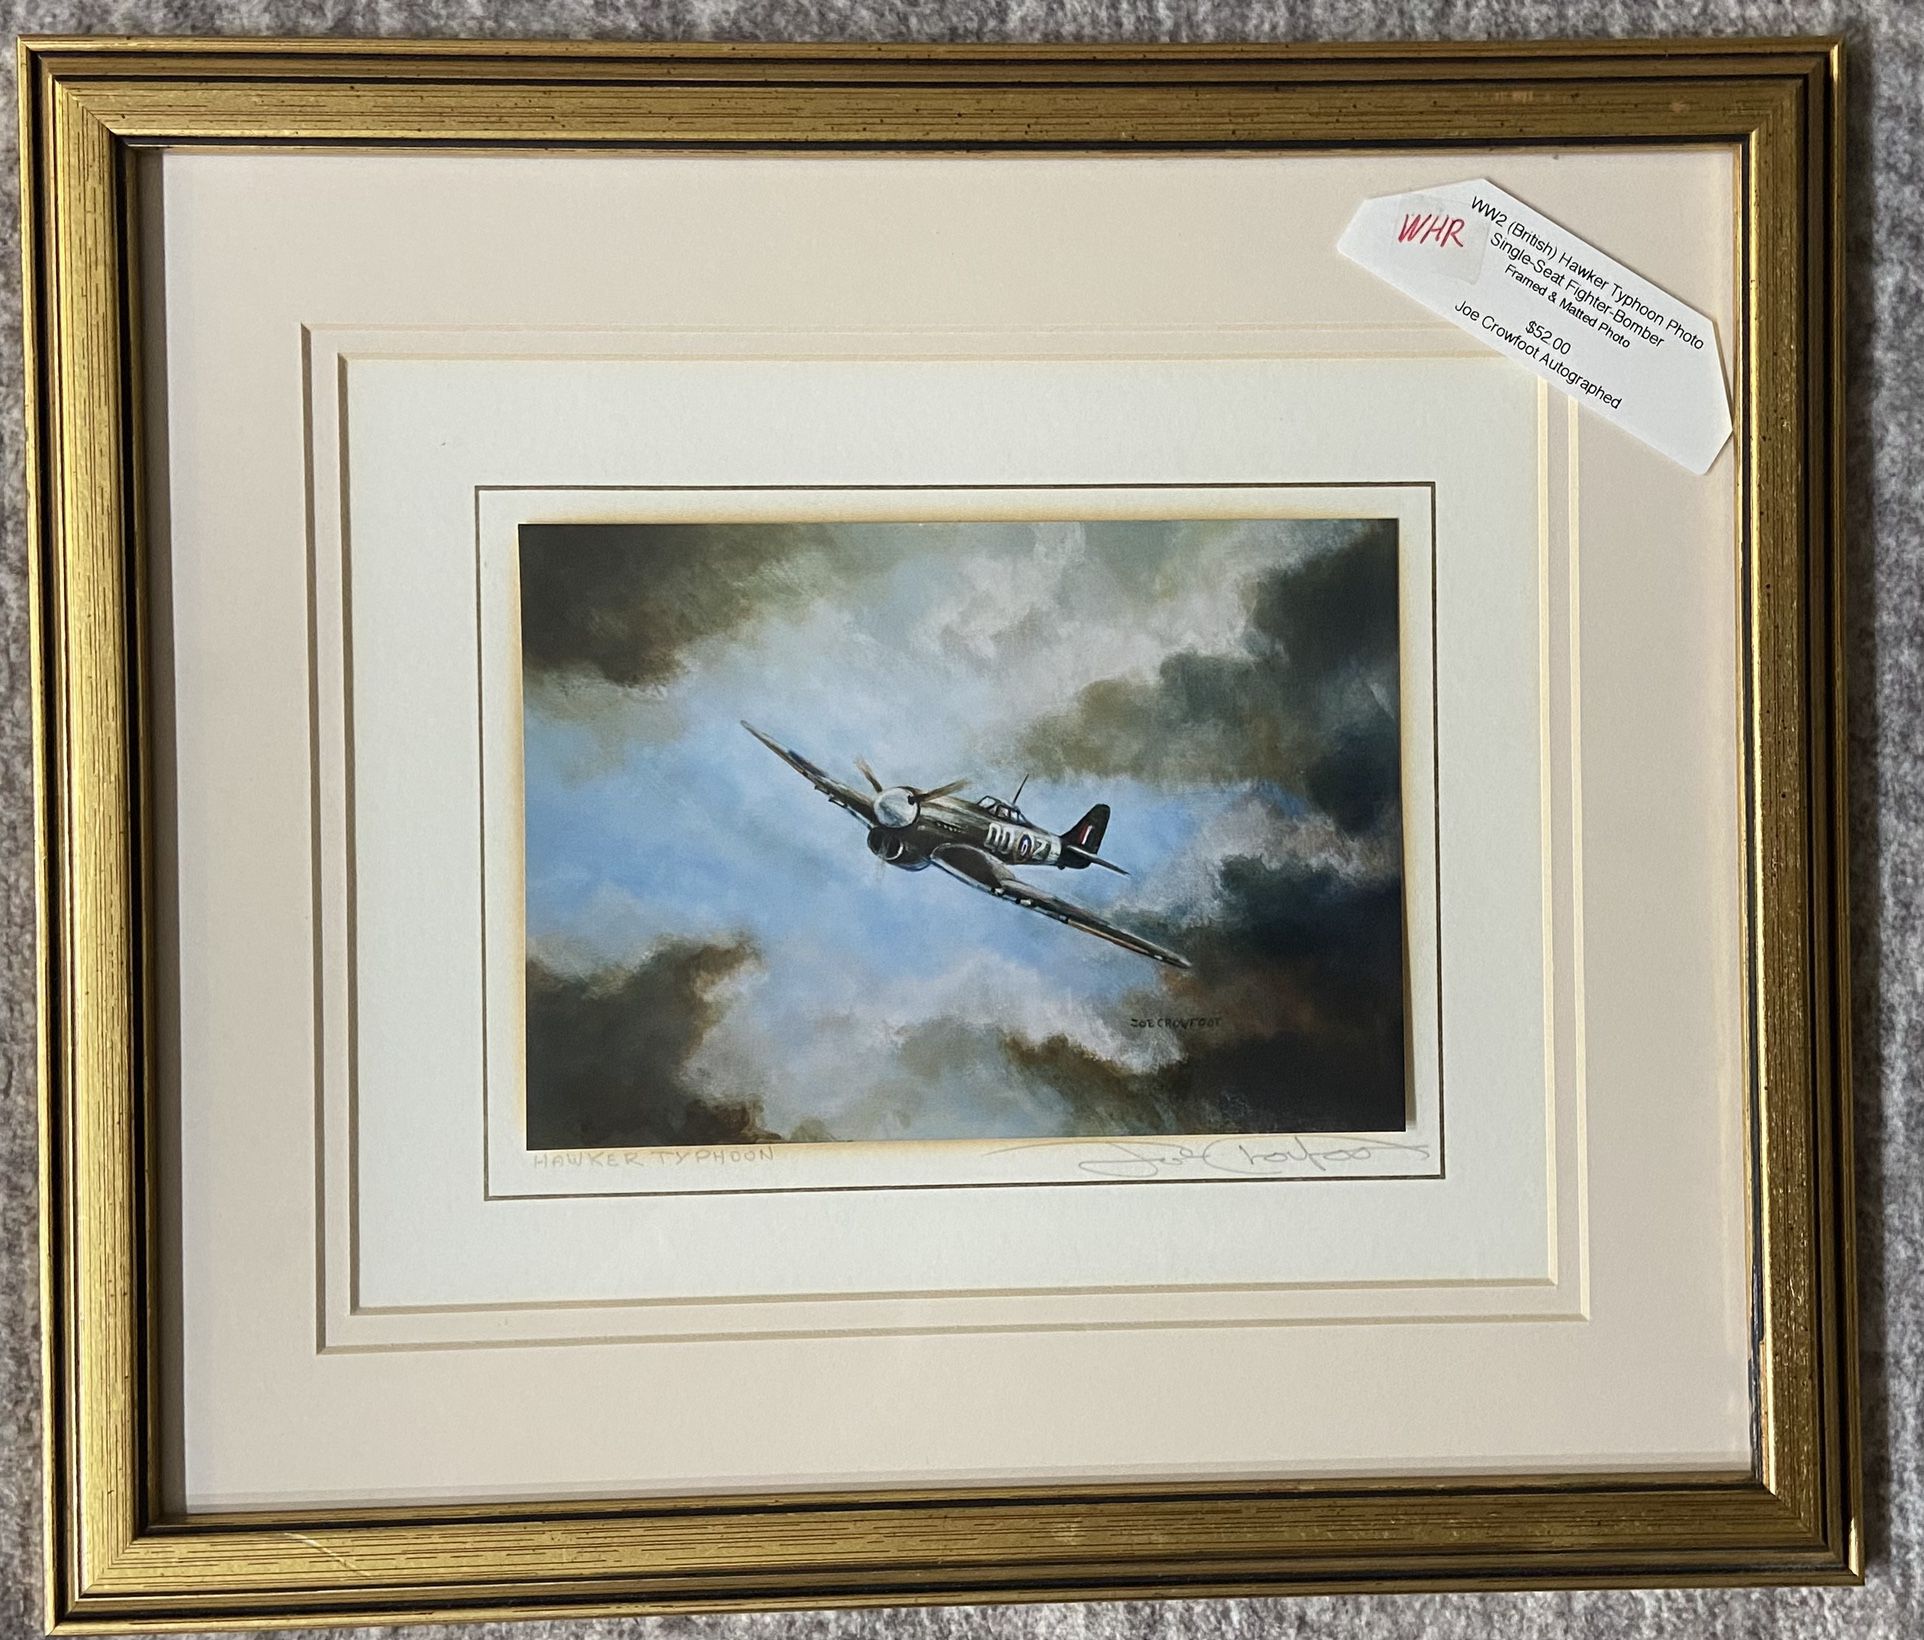 WW2 (BRITISH) HAWKER TYPHOON FIGHTER JET PHOTO - FRAMED, MATTED, & AUTOGRAPHED